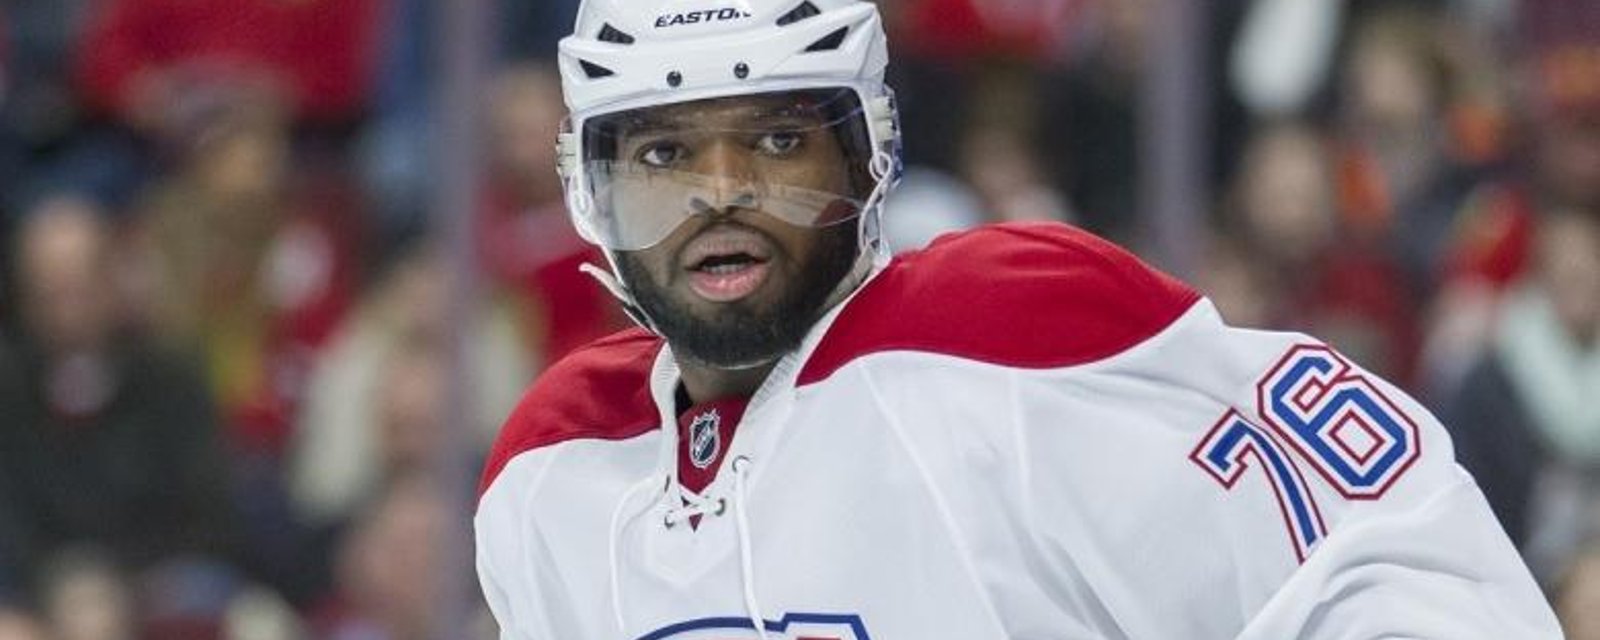 Habs coach throws P.K. Subban under the bus after another loss.